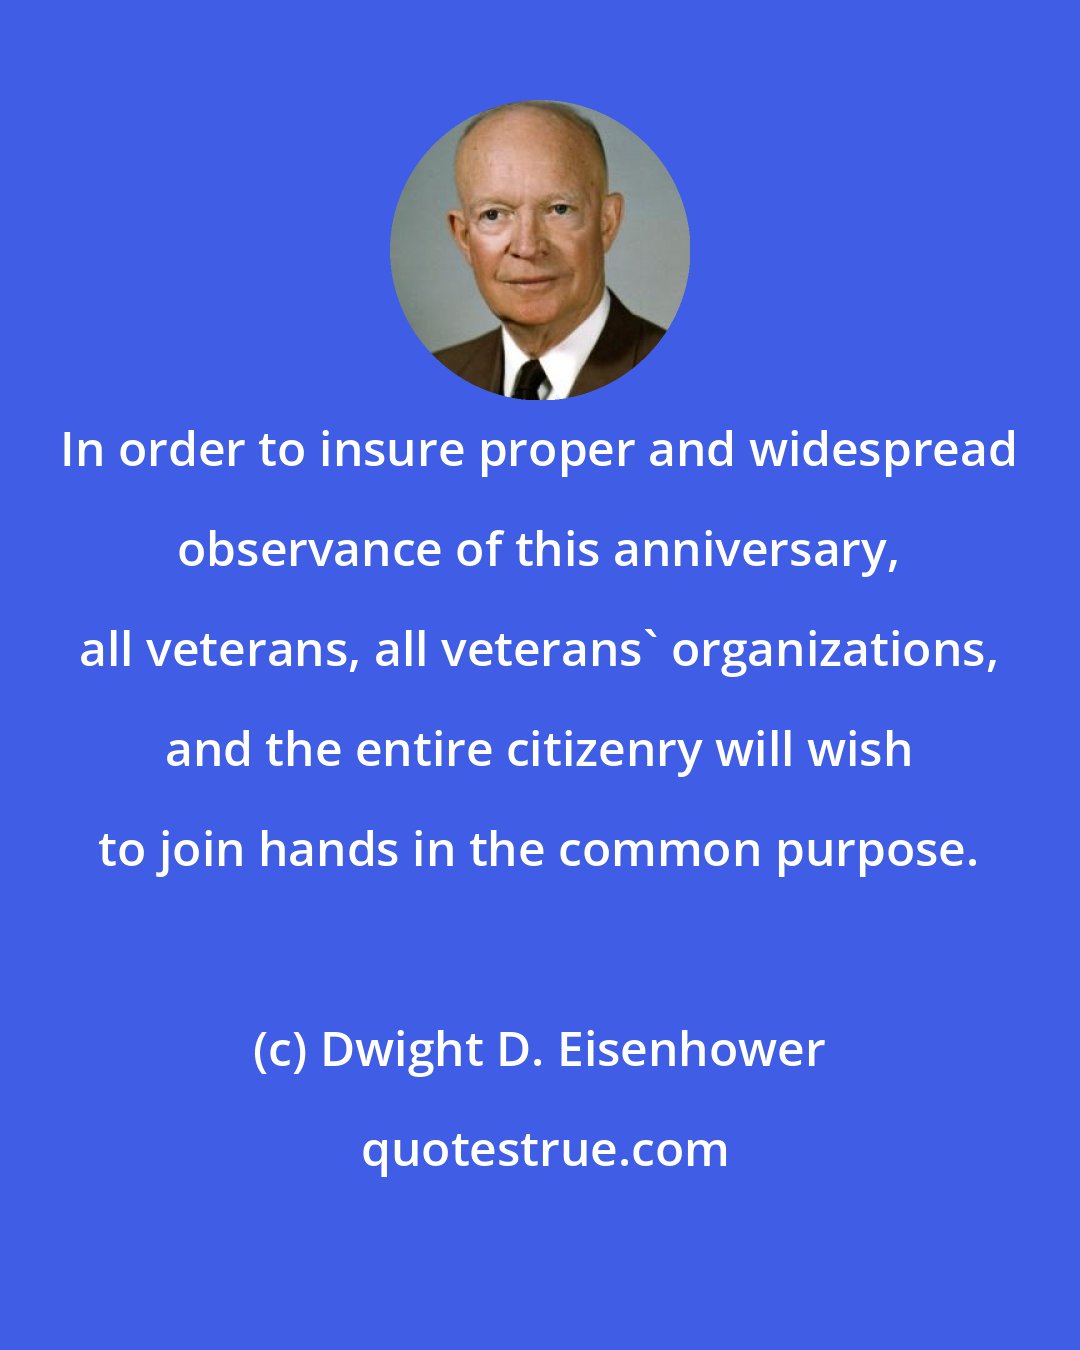 Dwight D. Eisenhower: In order to insure proper and widespread observance of this anniversary, all veterans, all veterans' organizations, and the entire citizenry will wish to join hands in the common purpose.